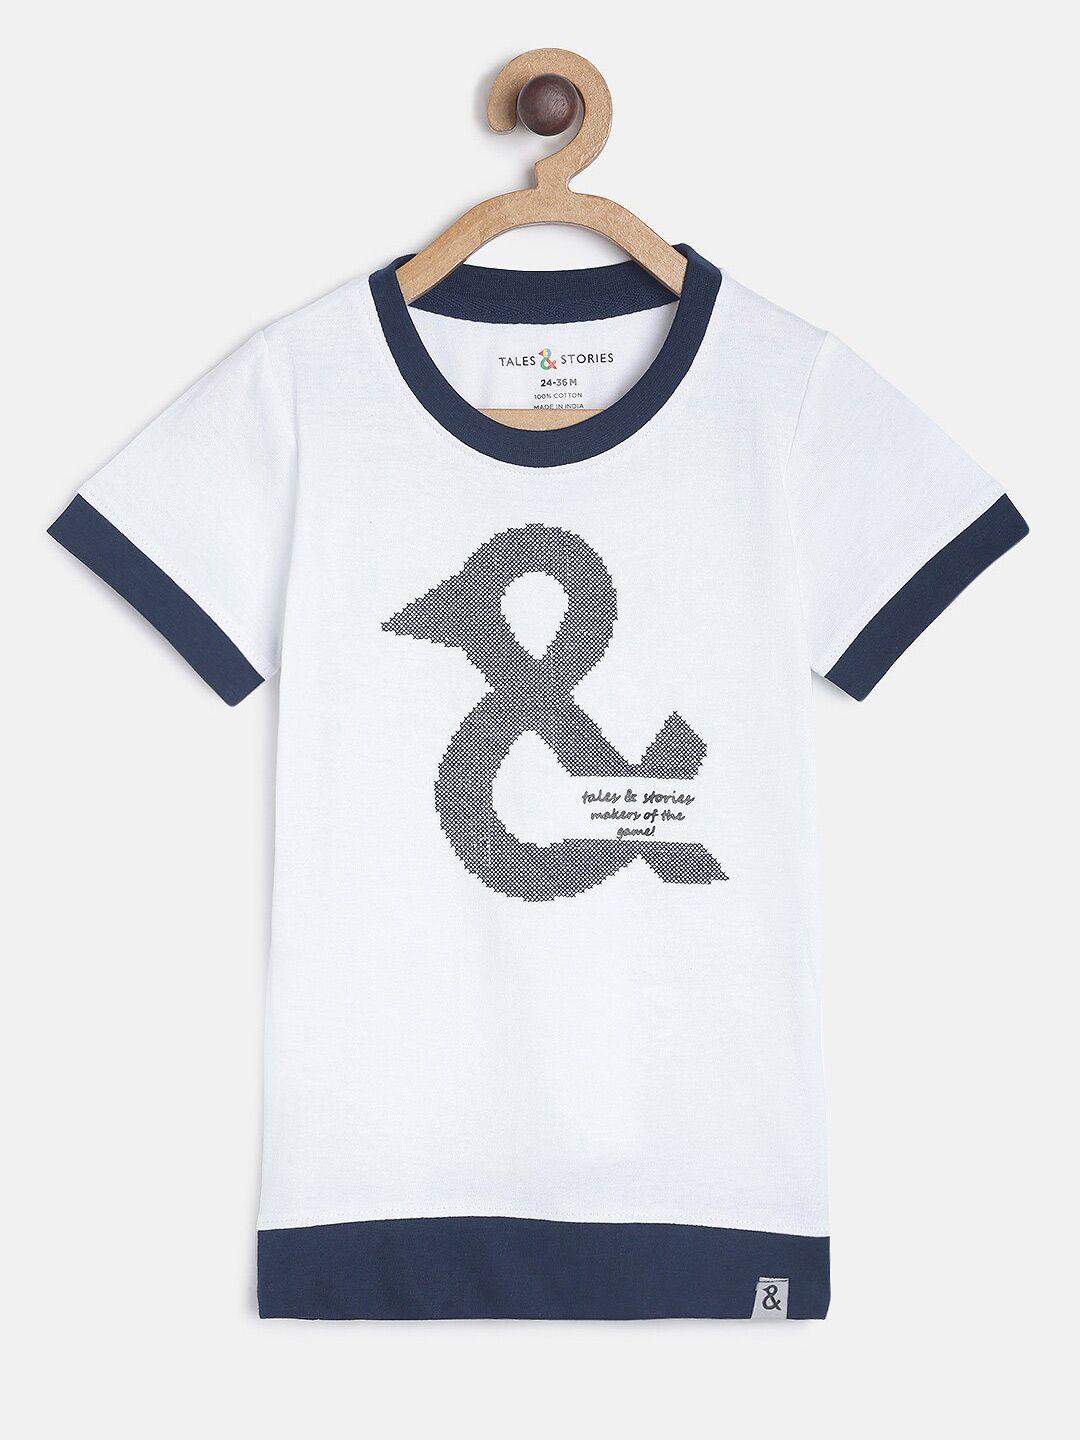 tales & stories boys white & navy blue typography printed t-shirt